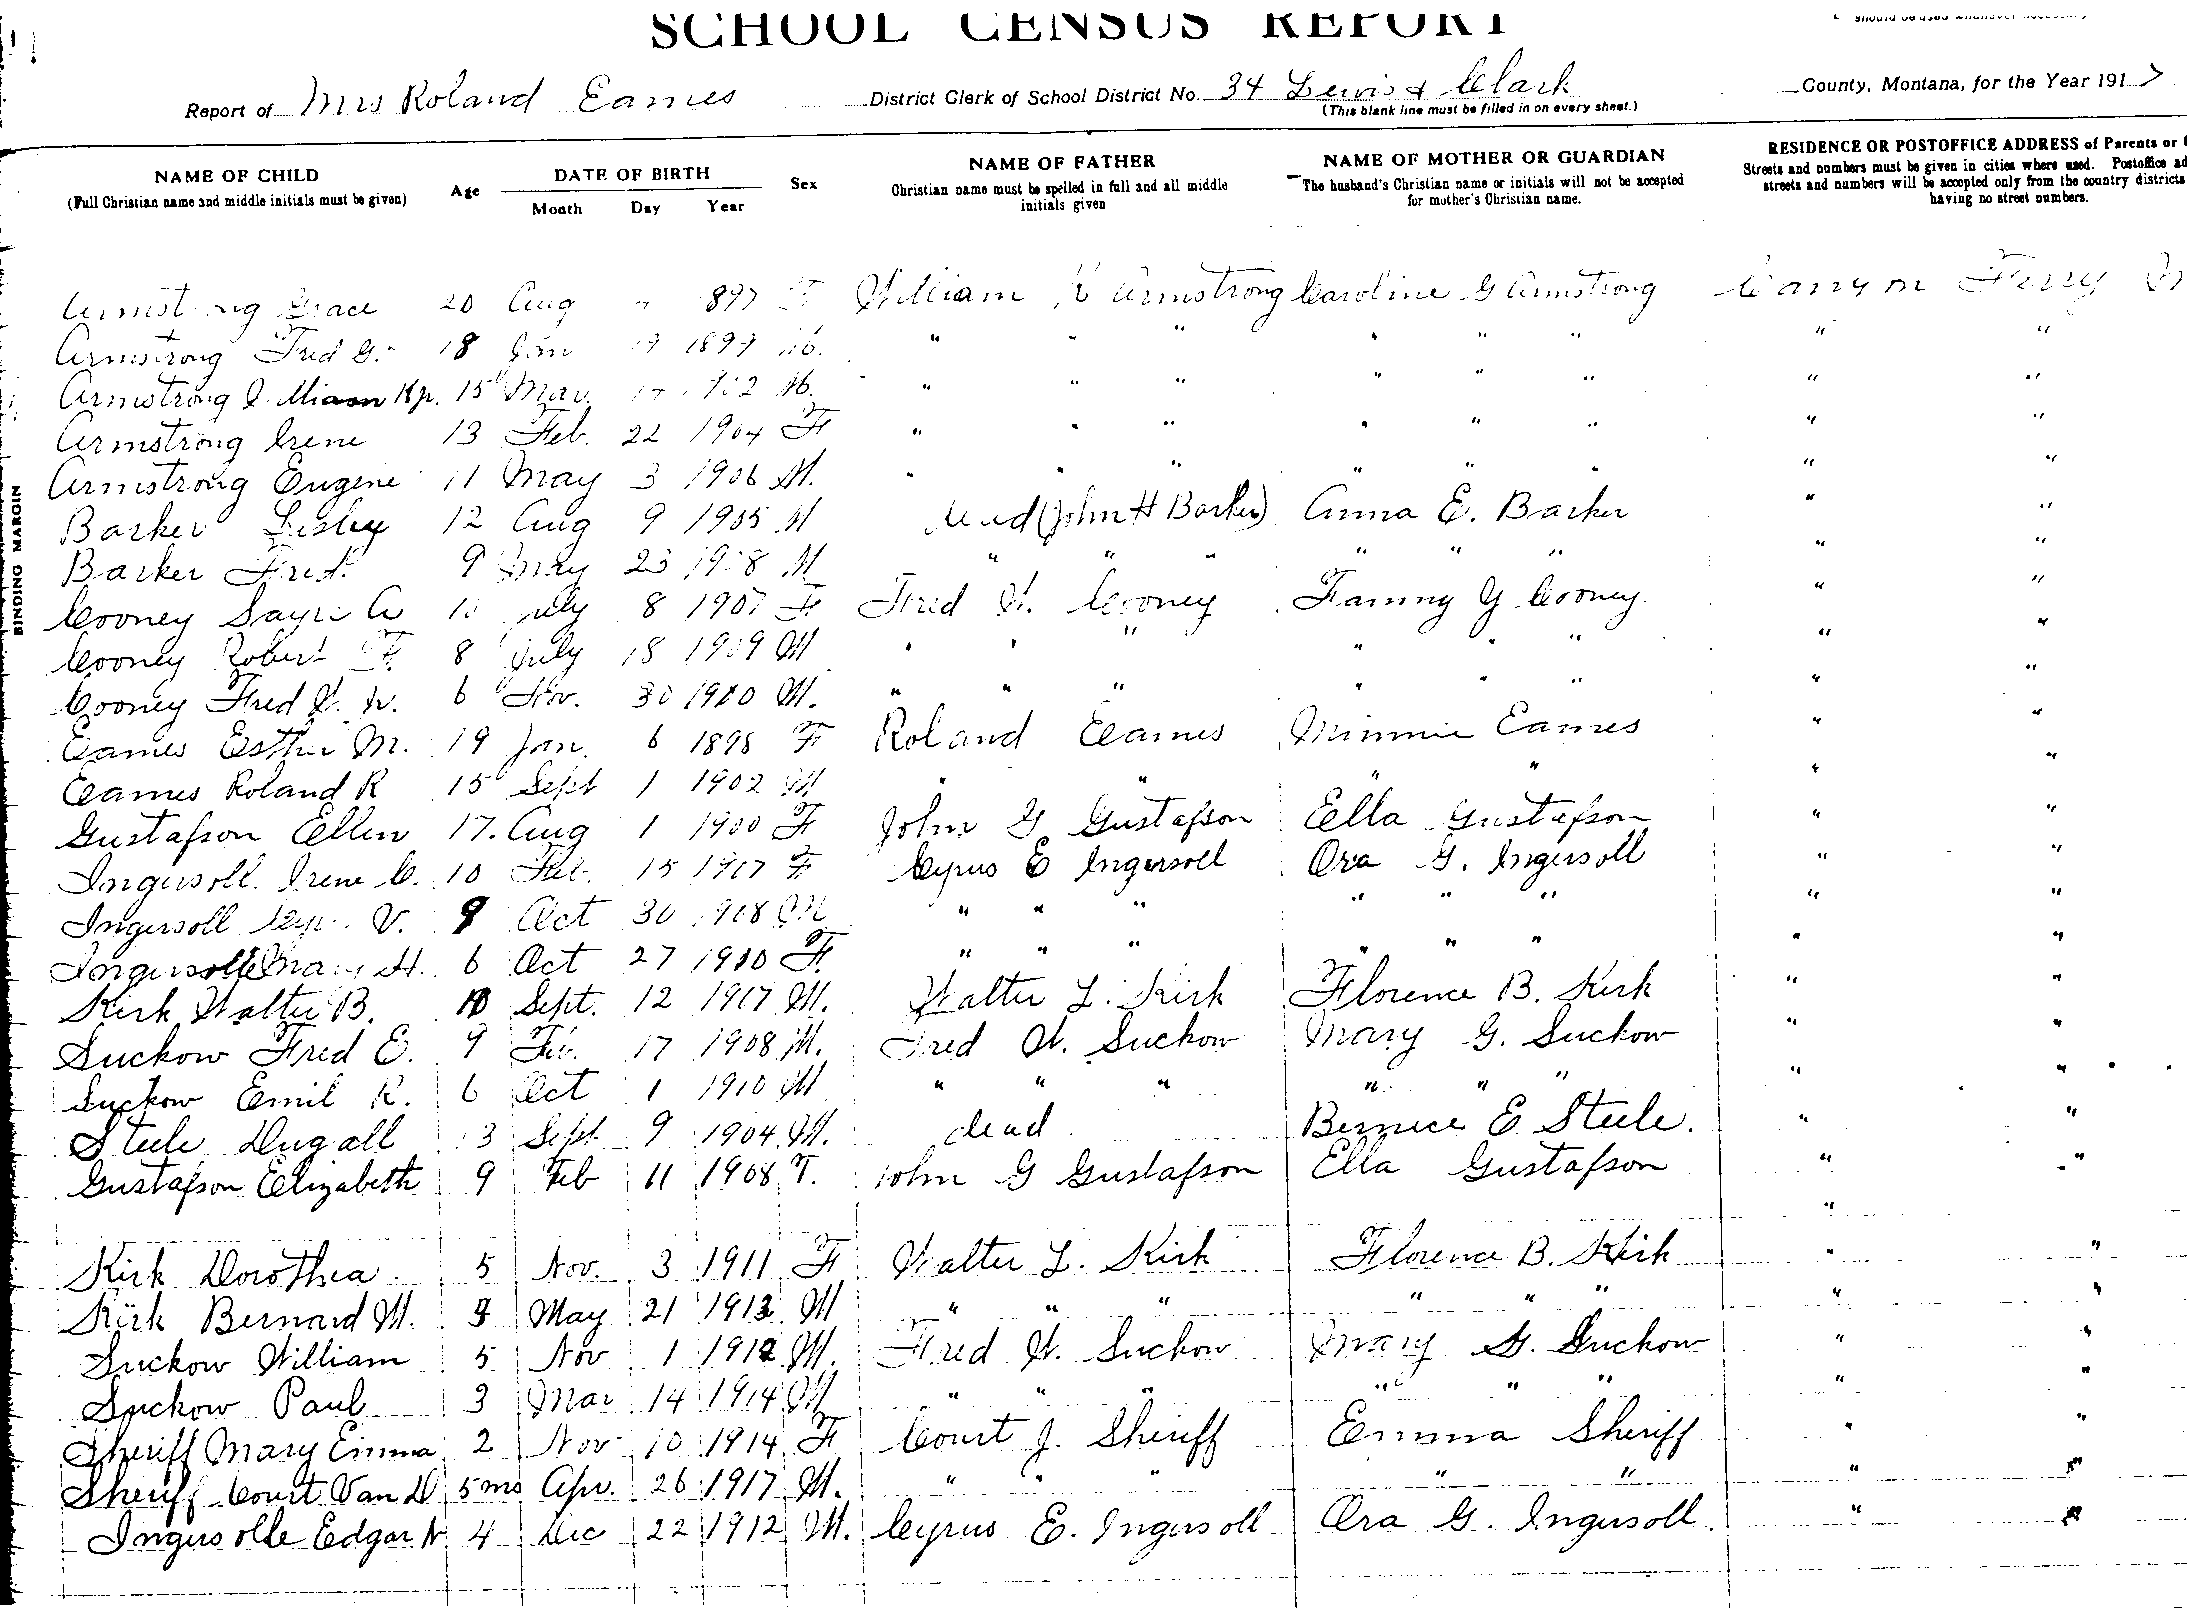 Canyon Ferry School Census 1917